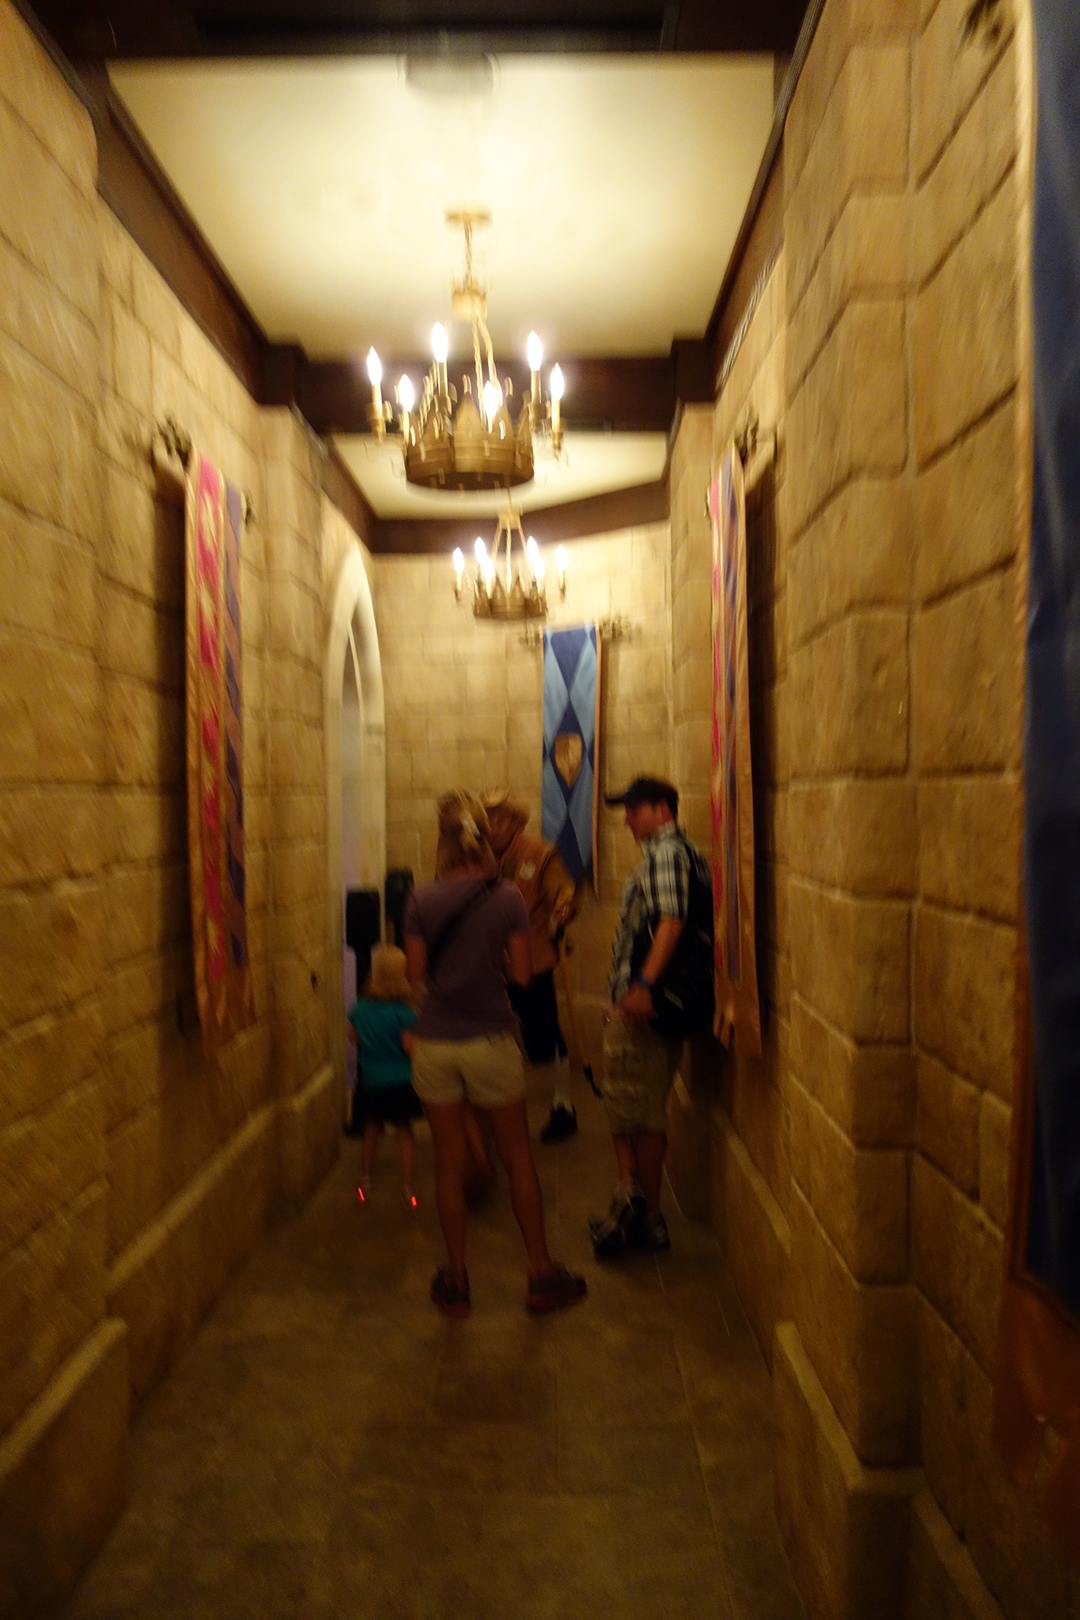 The benefit of the Fastpass experience is a really short wait.  I went on a party day that was really quiet and the lines reached 75 minutes for Rapunzel and 50 minutes for Cinderella.